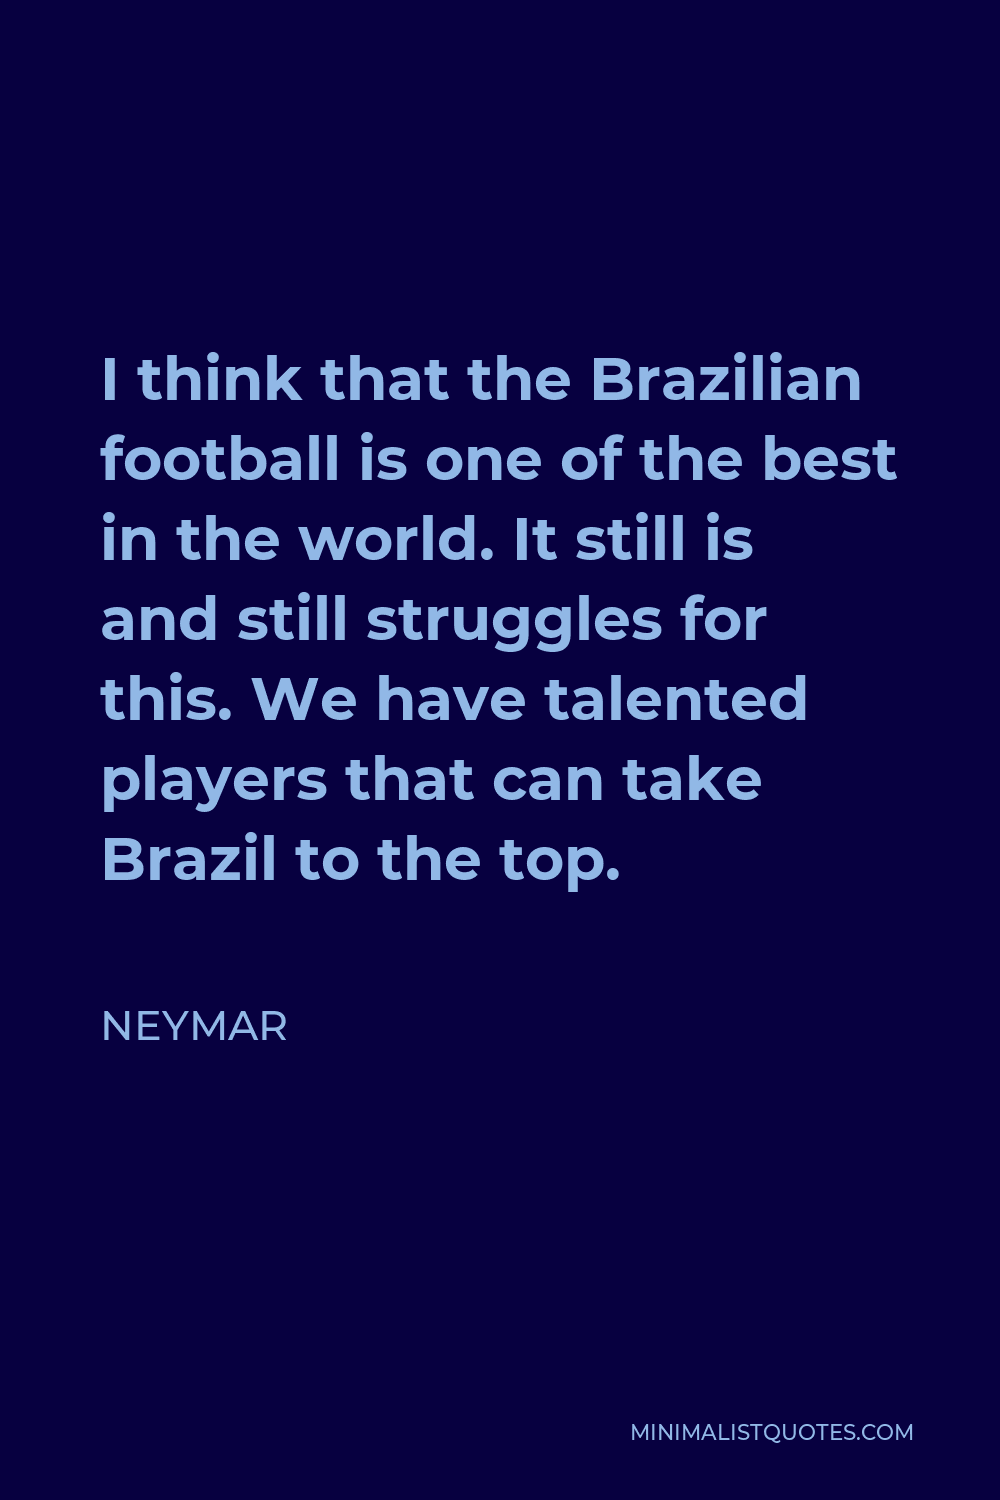 Neymar Quote - I think that the Brazilian football is one of the best in the world. It still is and still struggles for this. We have talented players that can take Brazil to the top.